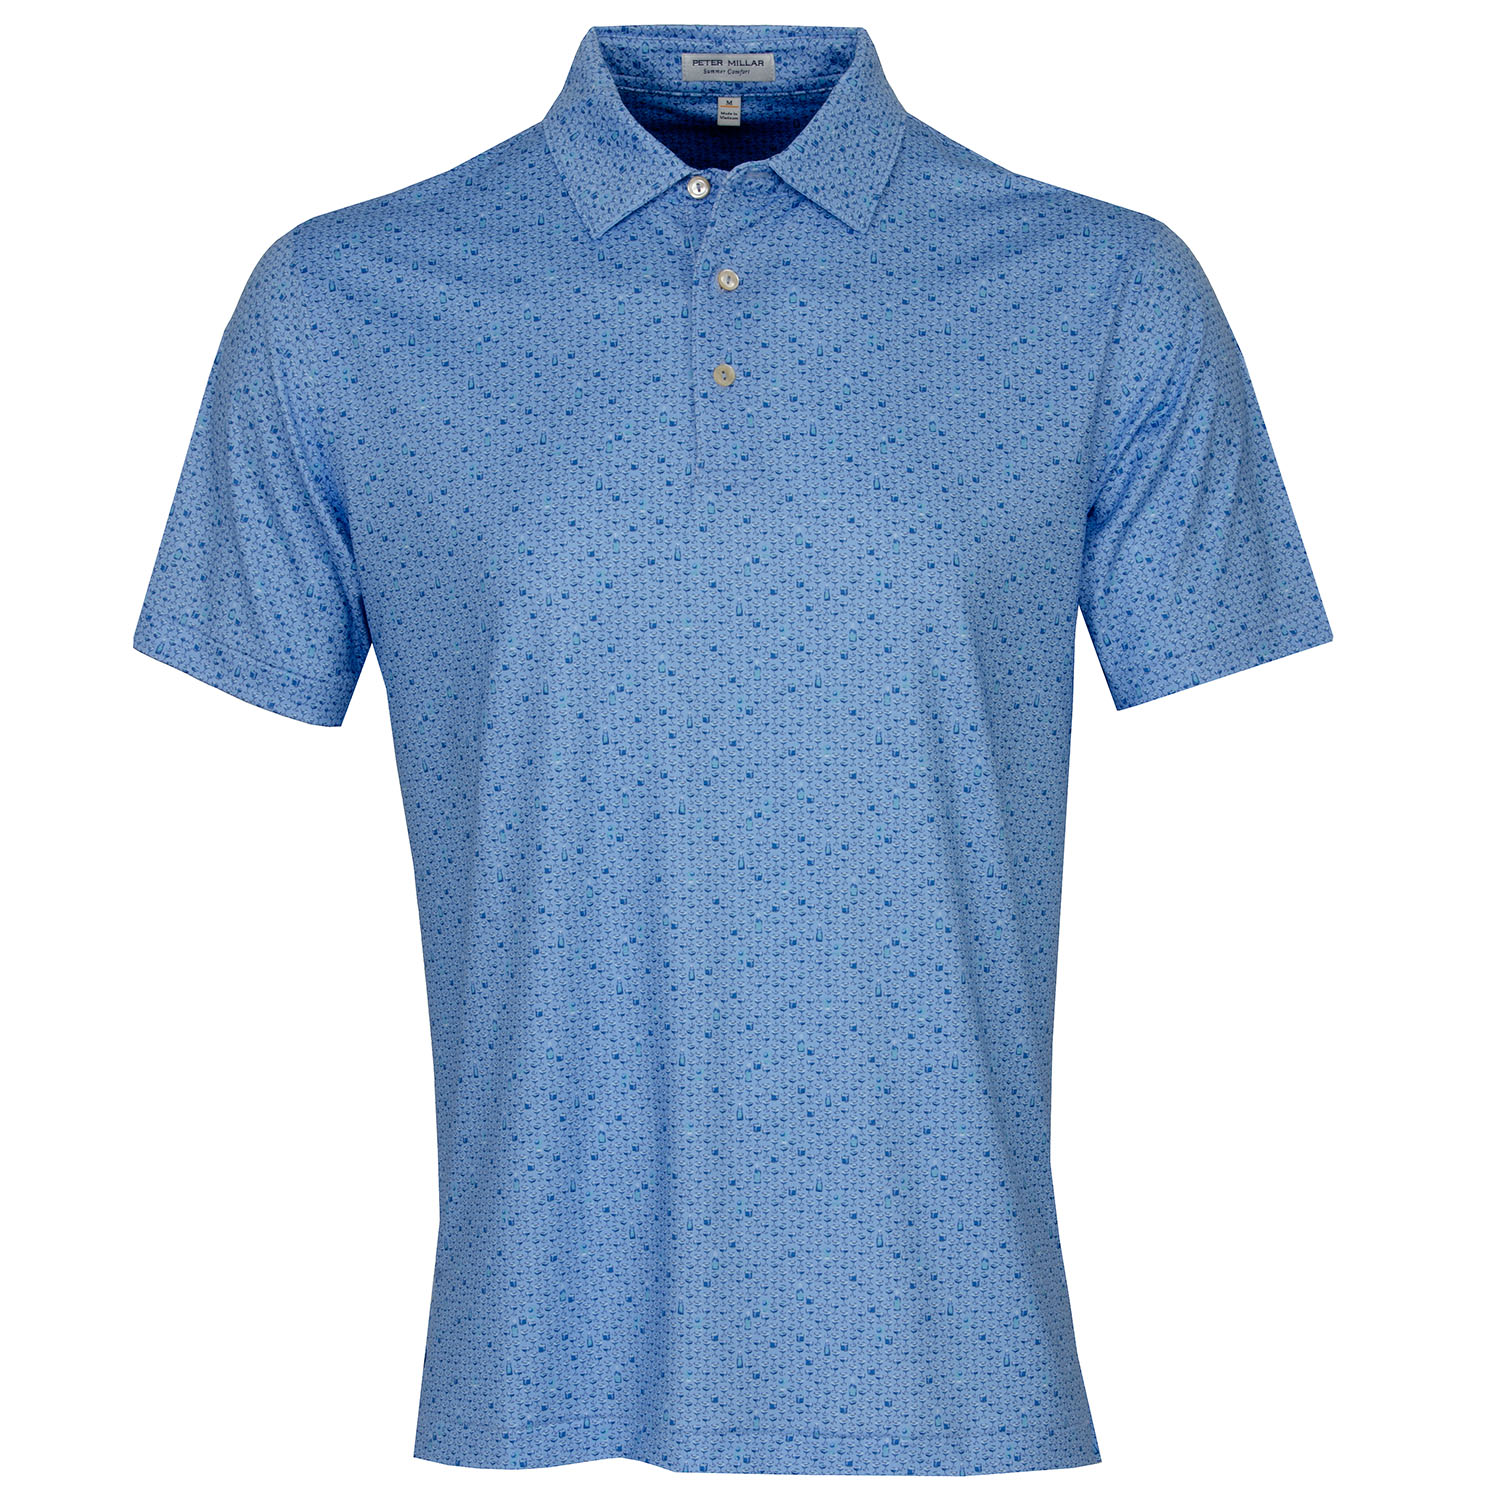 Peter Millar Whiskey Sour Performance Jersey Polo Shirt